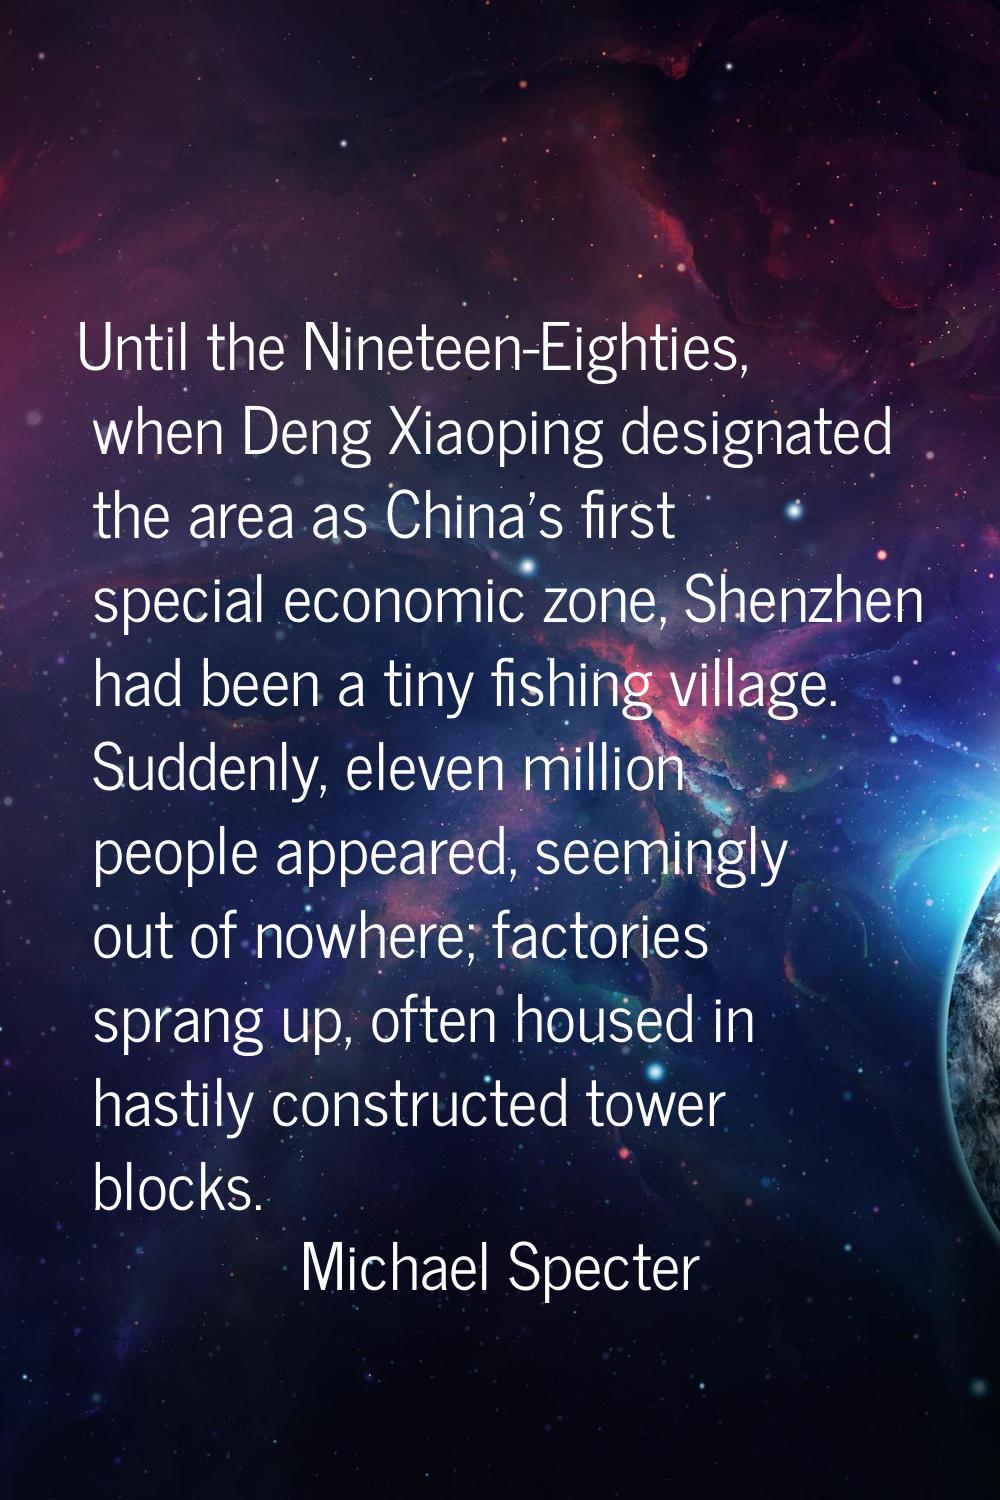 Until the Nineteen-Eighties, when Deng Xiaoping designated the area as China's first special econom